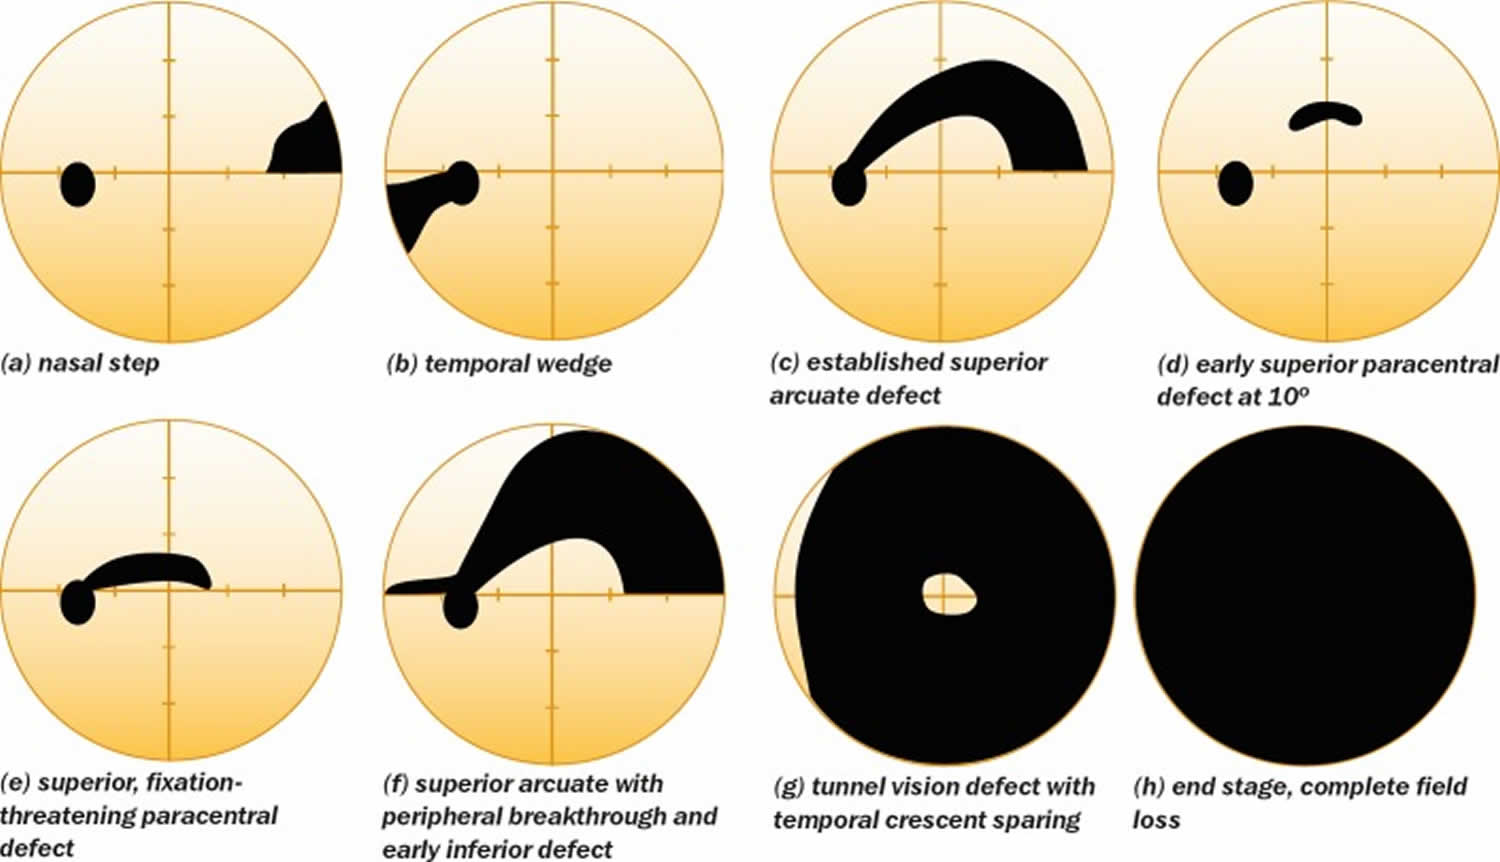 glaucomatous visual field defects